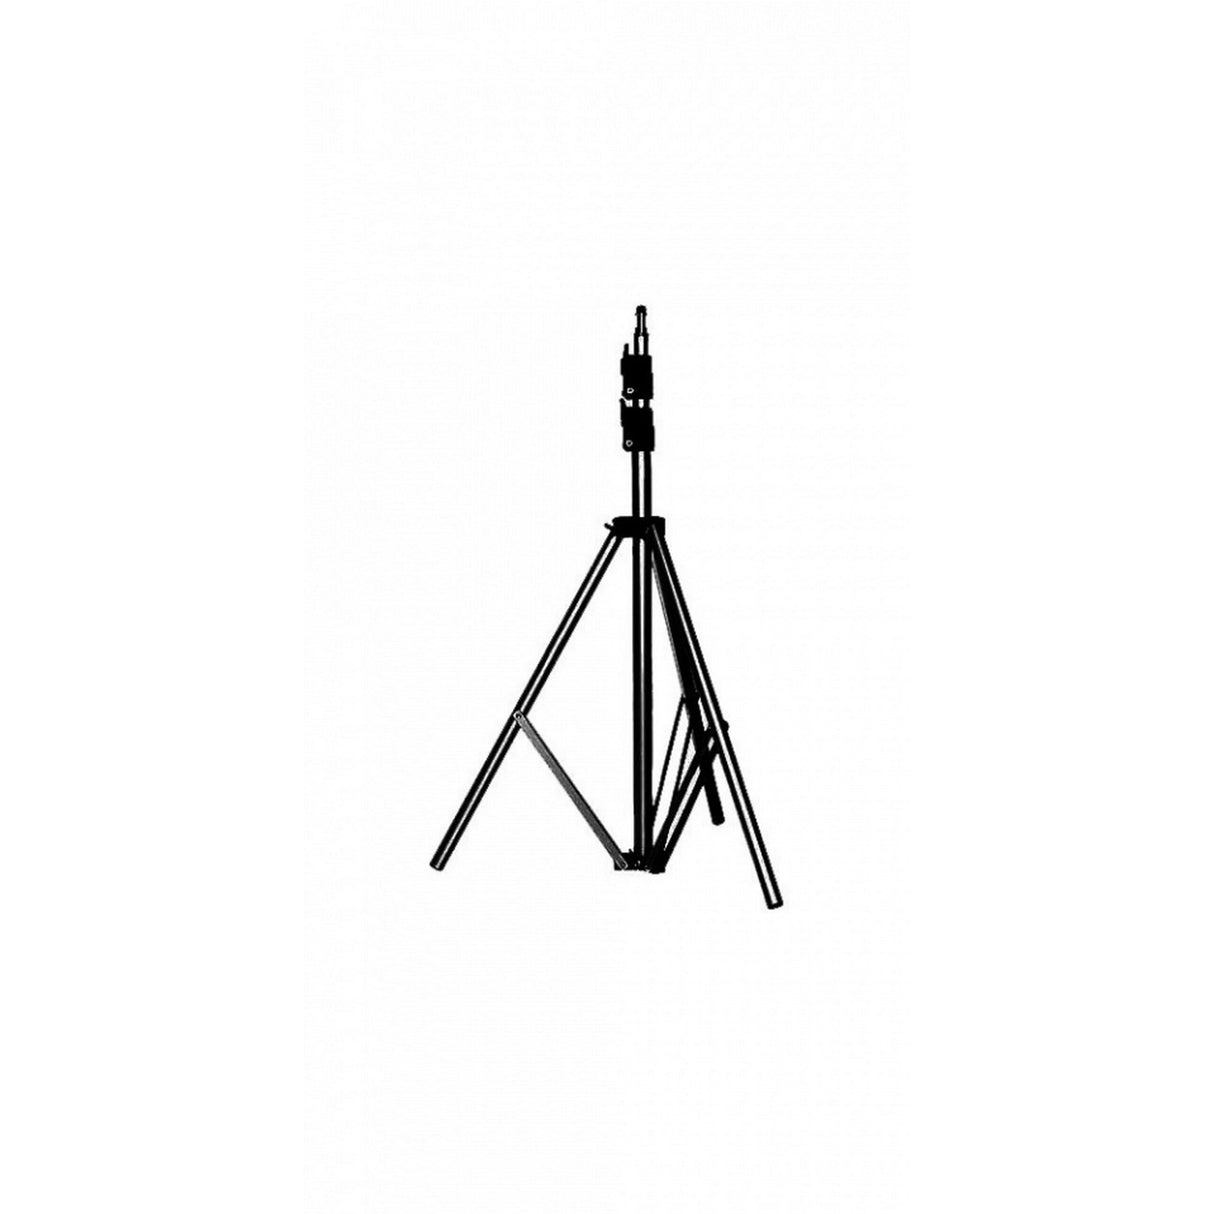 Manfrotto 367B Eco 9 Stand with Knobs, Black